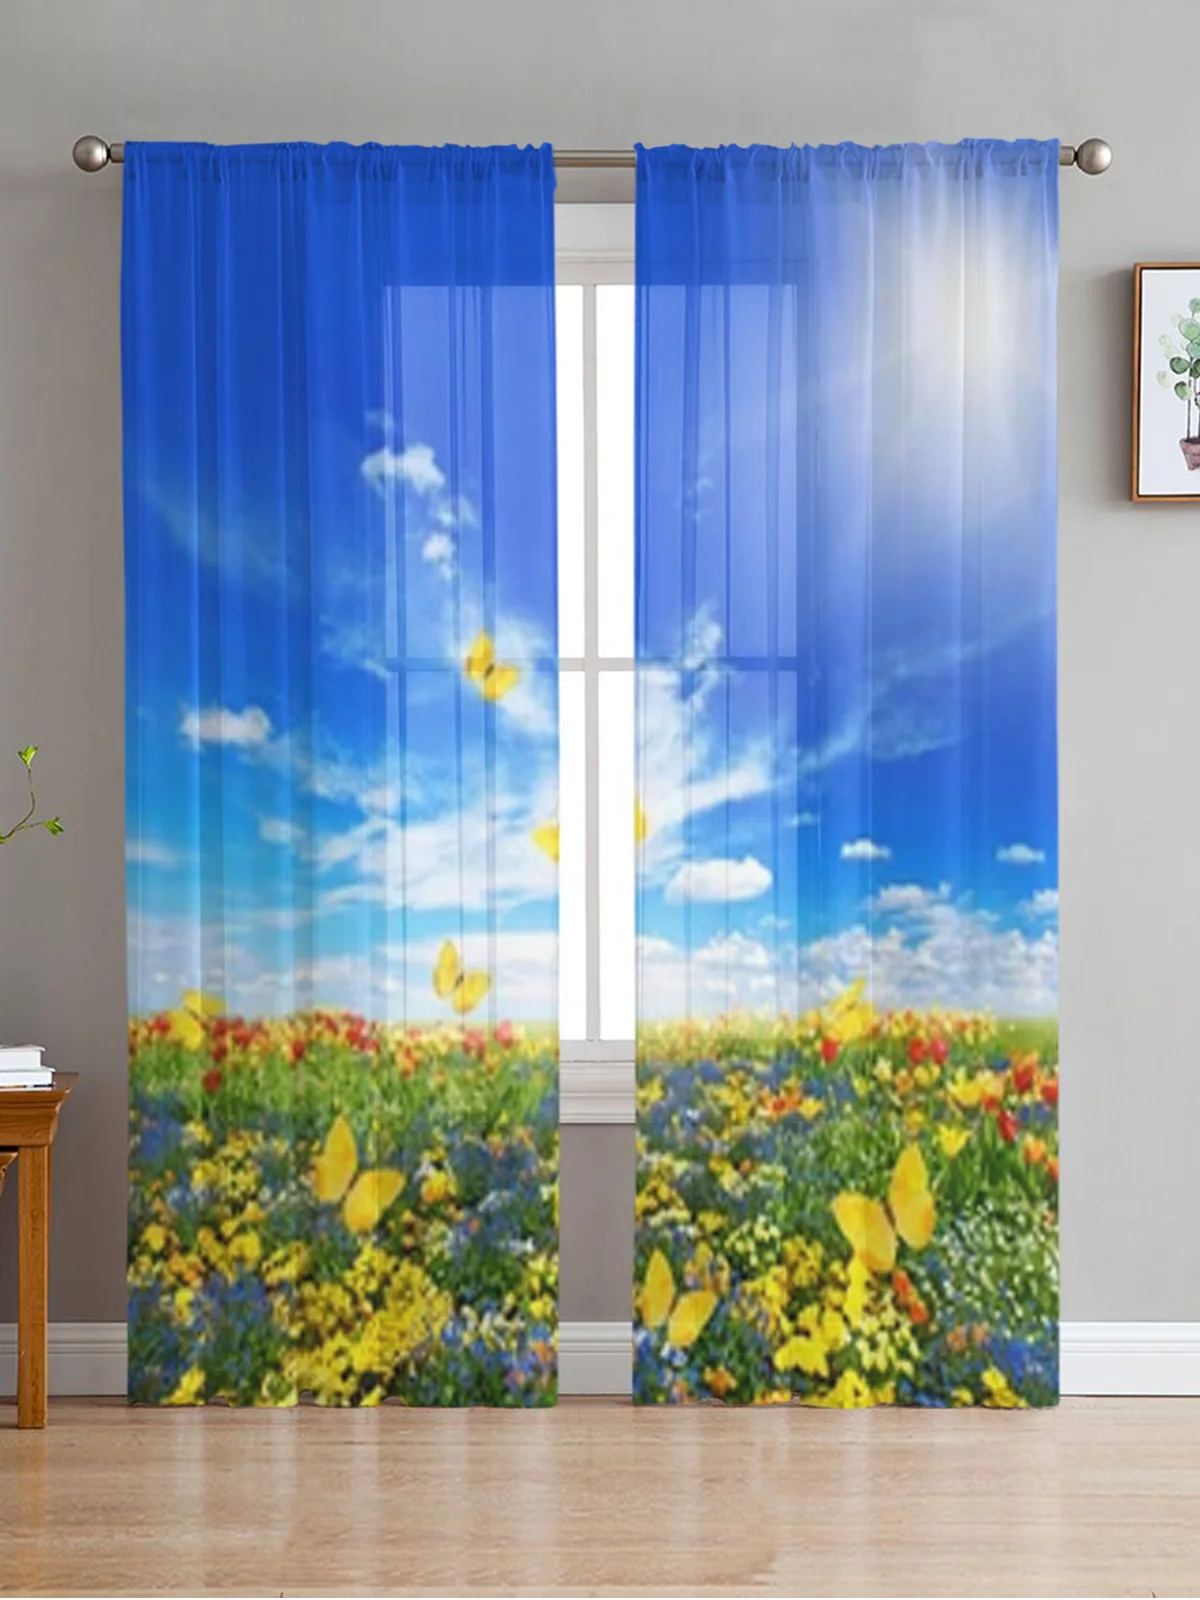 

Meadow With Flowers Butterflies Sheer Curtains Bedroom Voile Curtain Living Room Window Sheer Curtains Kitchen Tulle Drapes